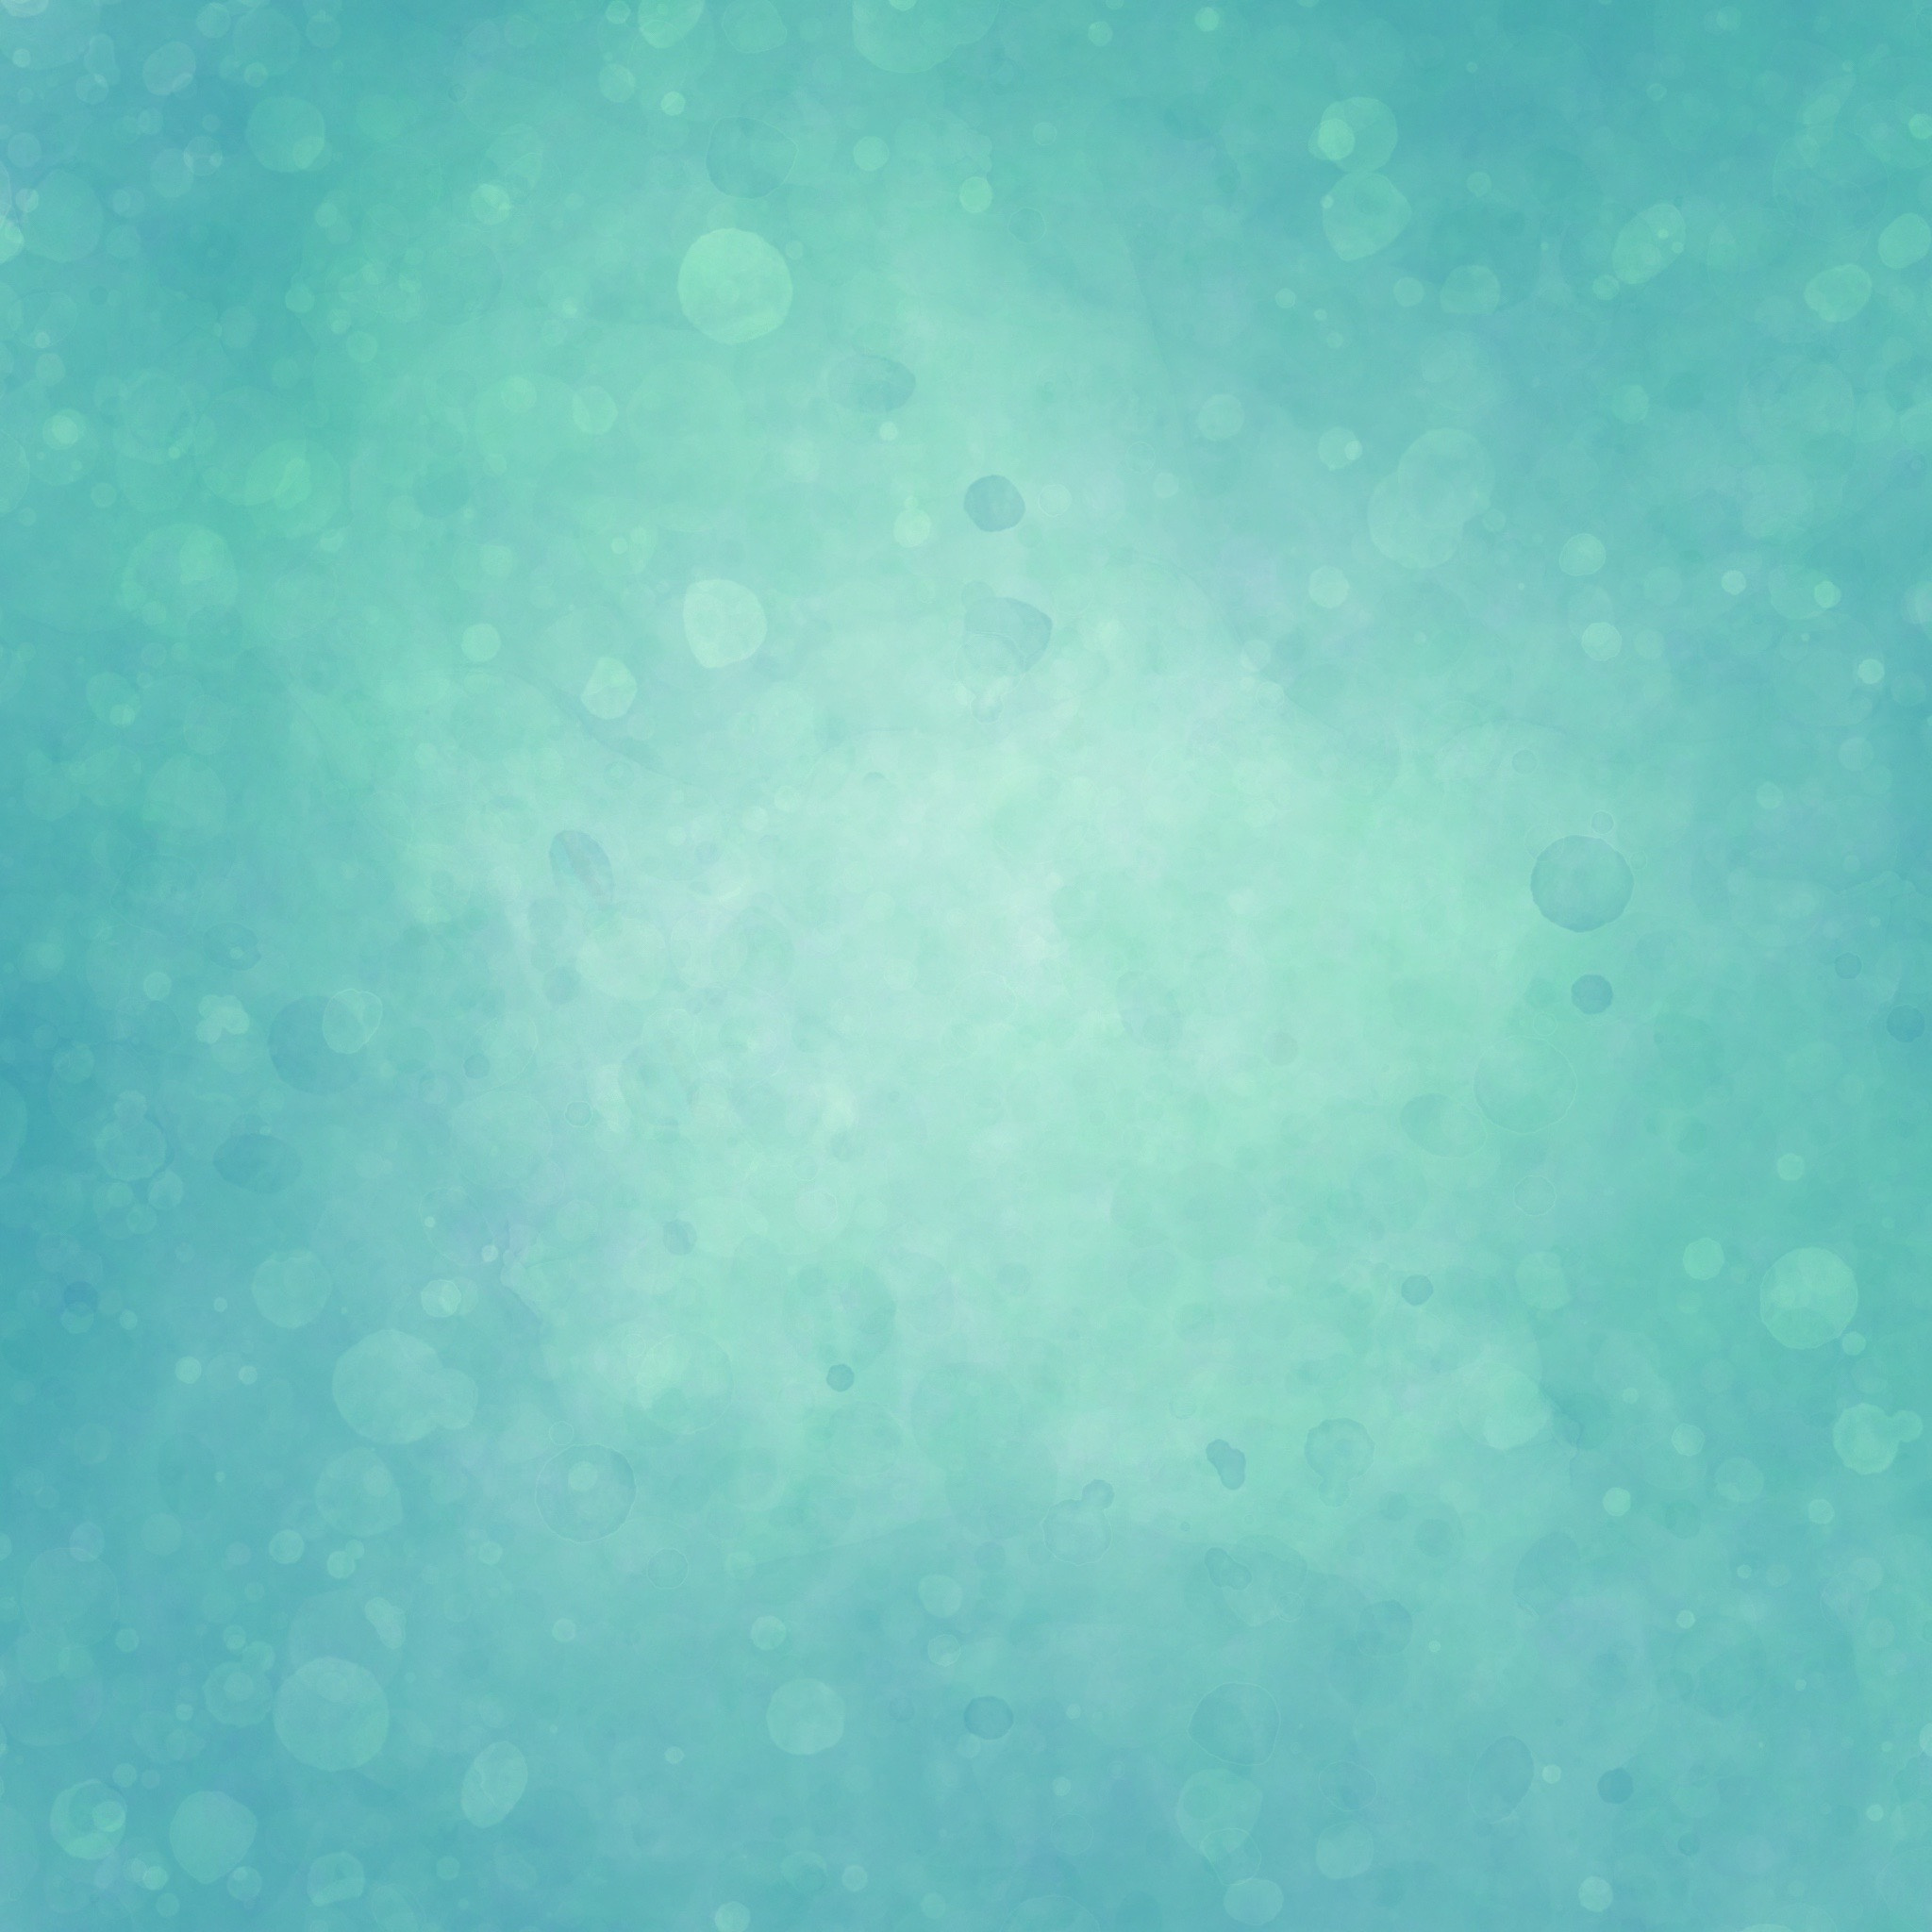 Teal Paint Background